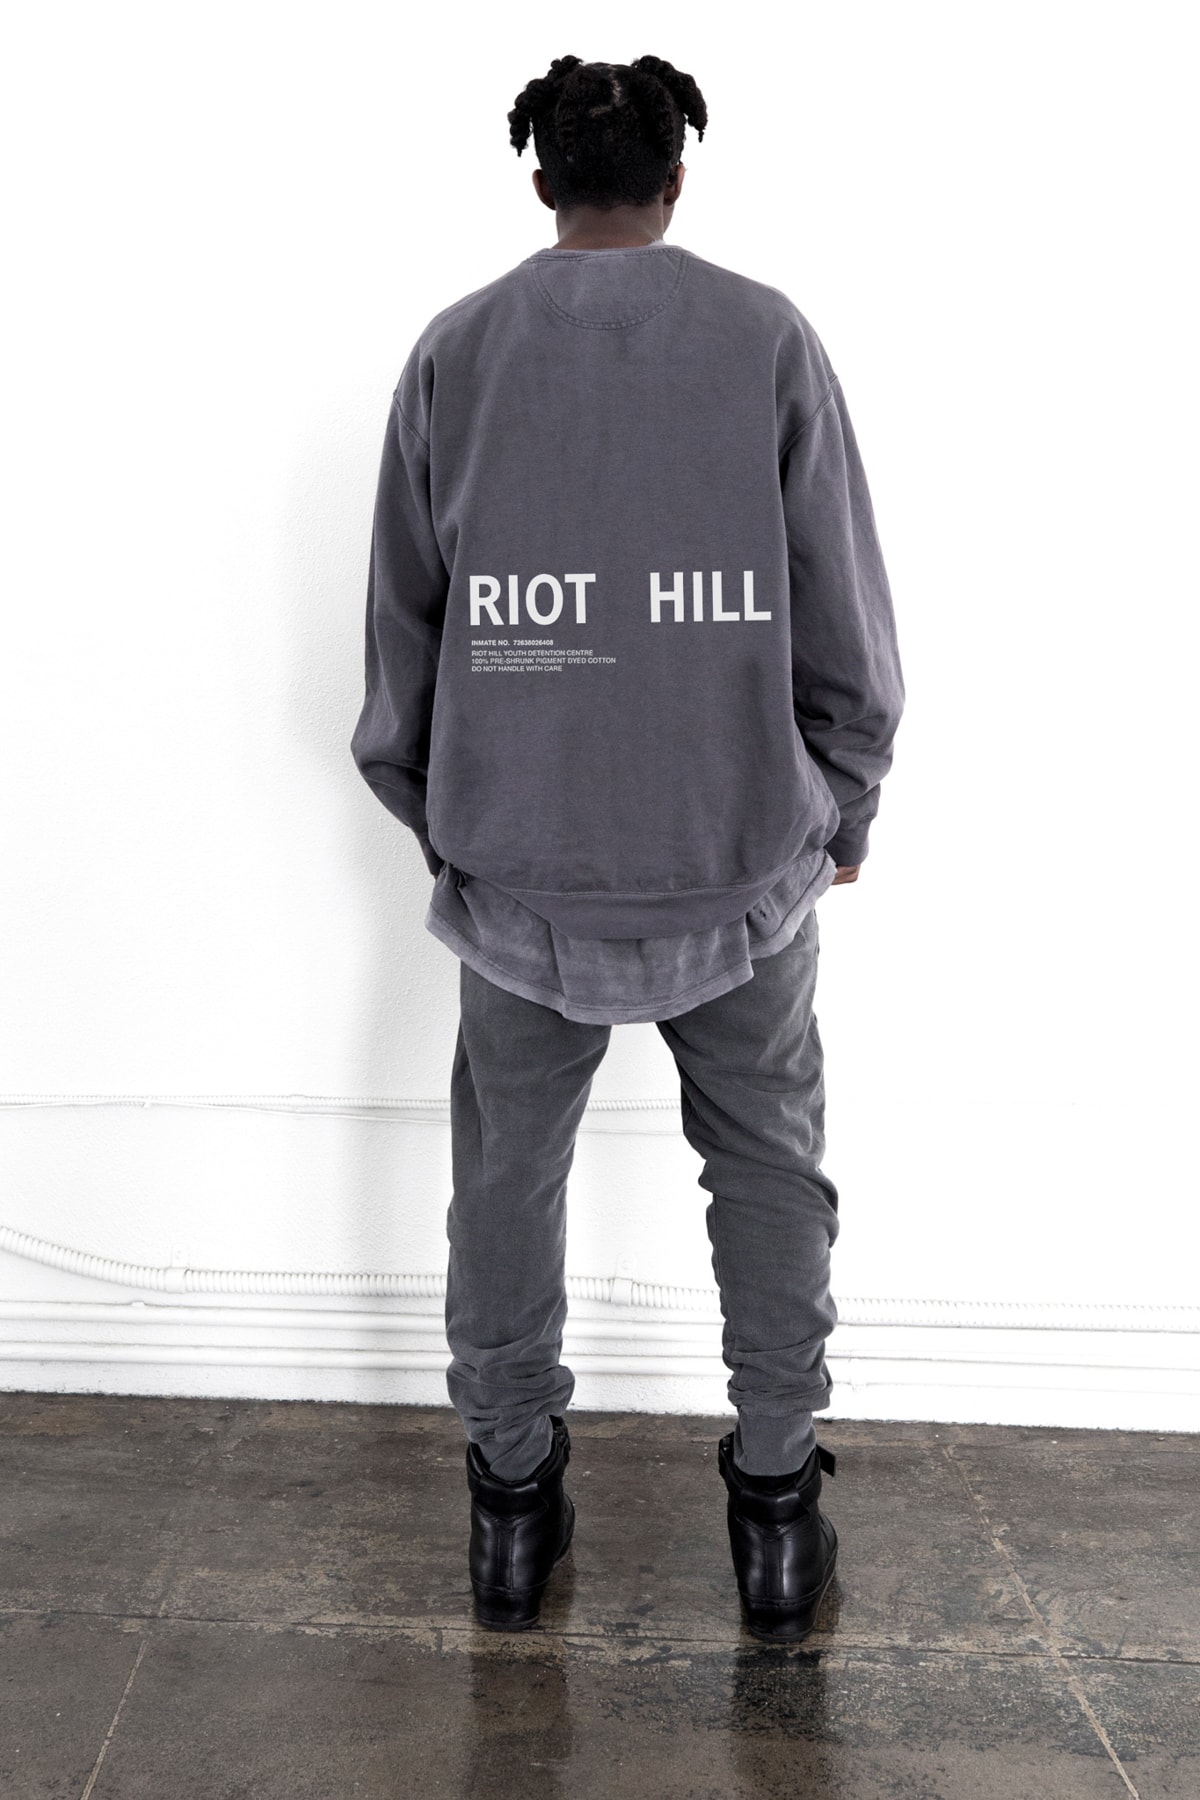 RIOT HILL™ Collection lookbook tactical military vests jackets hoodies sweaters release info